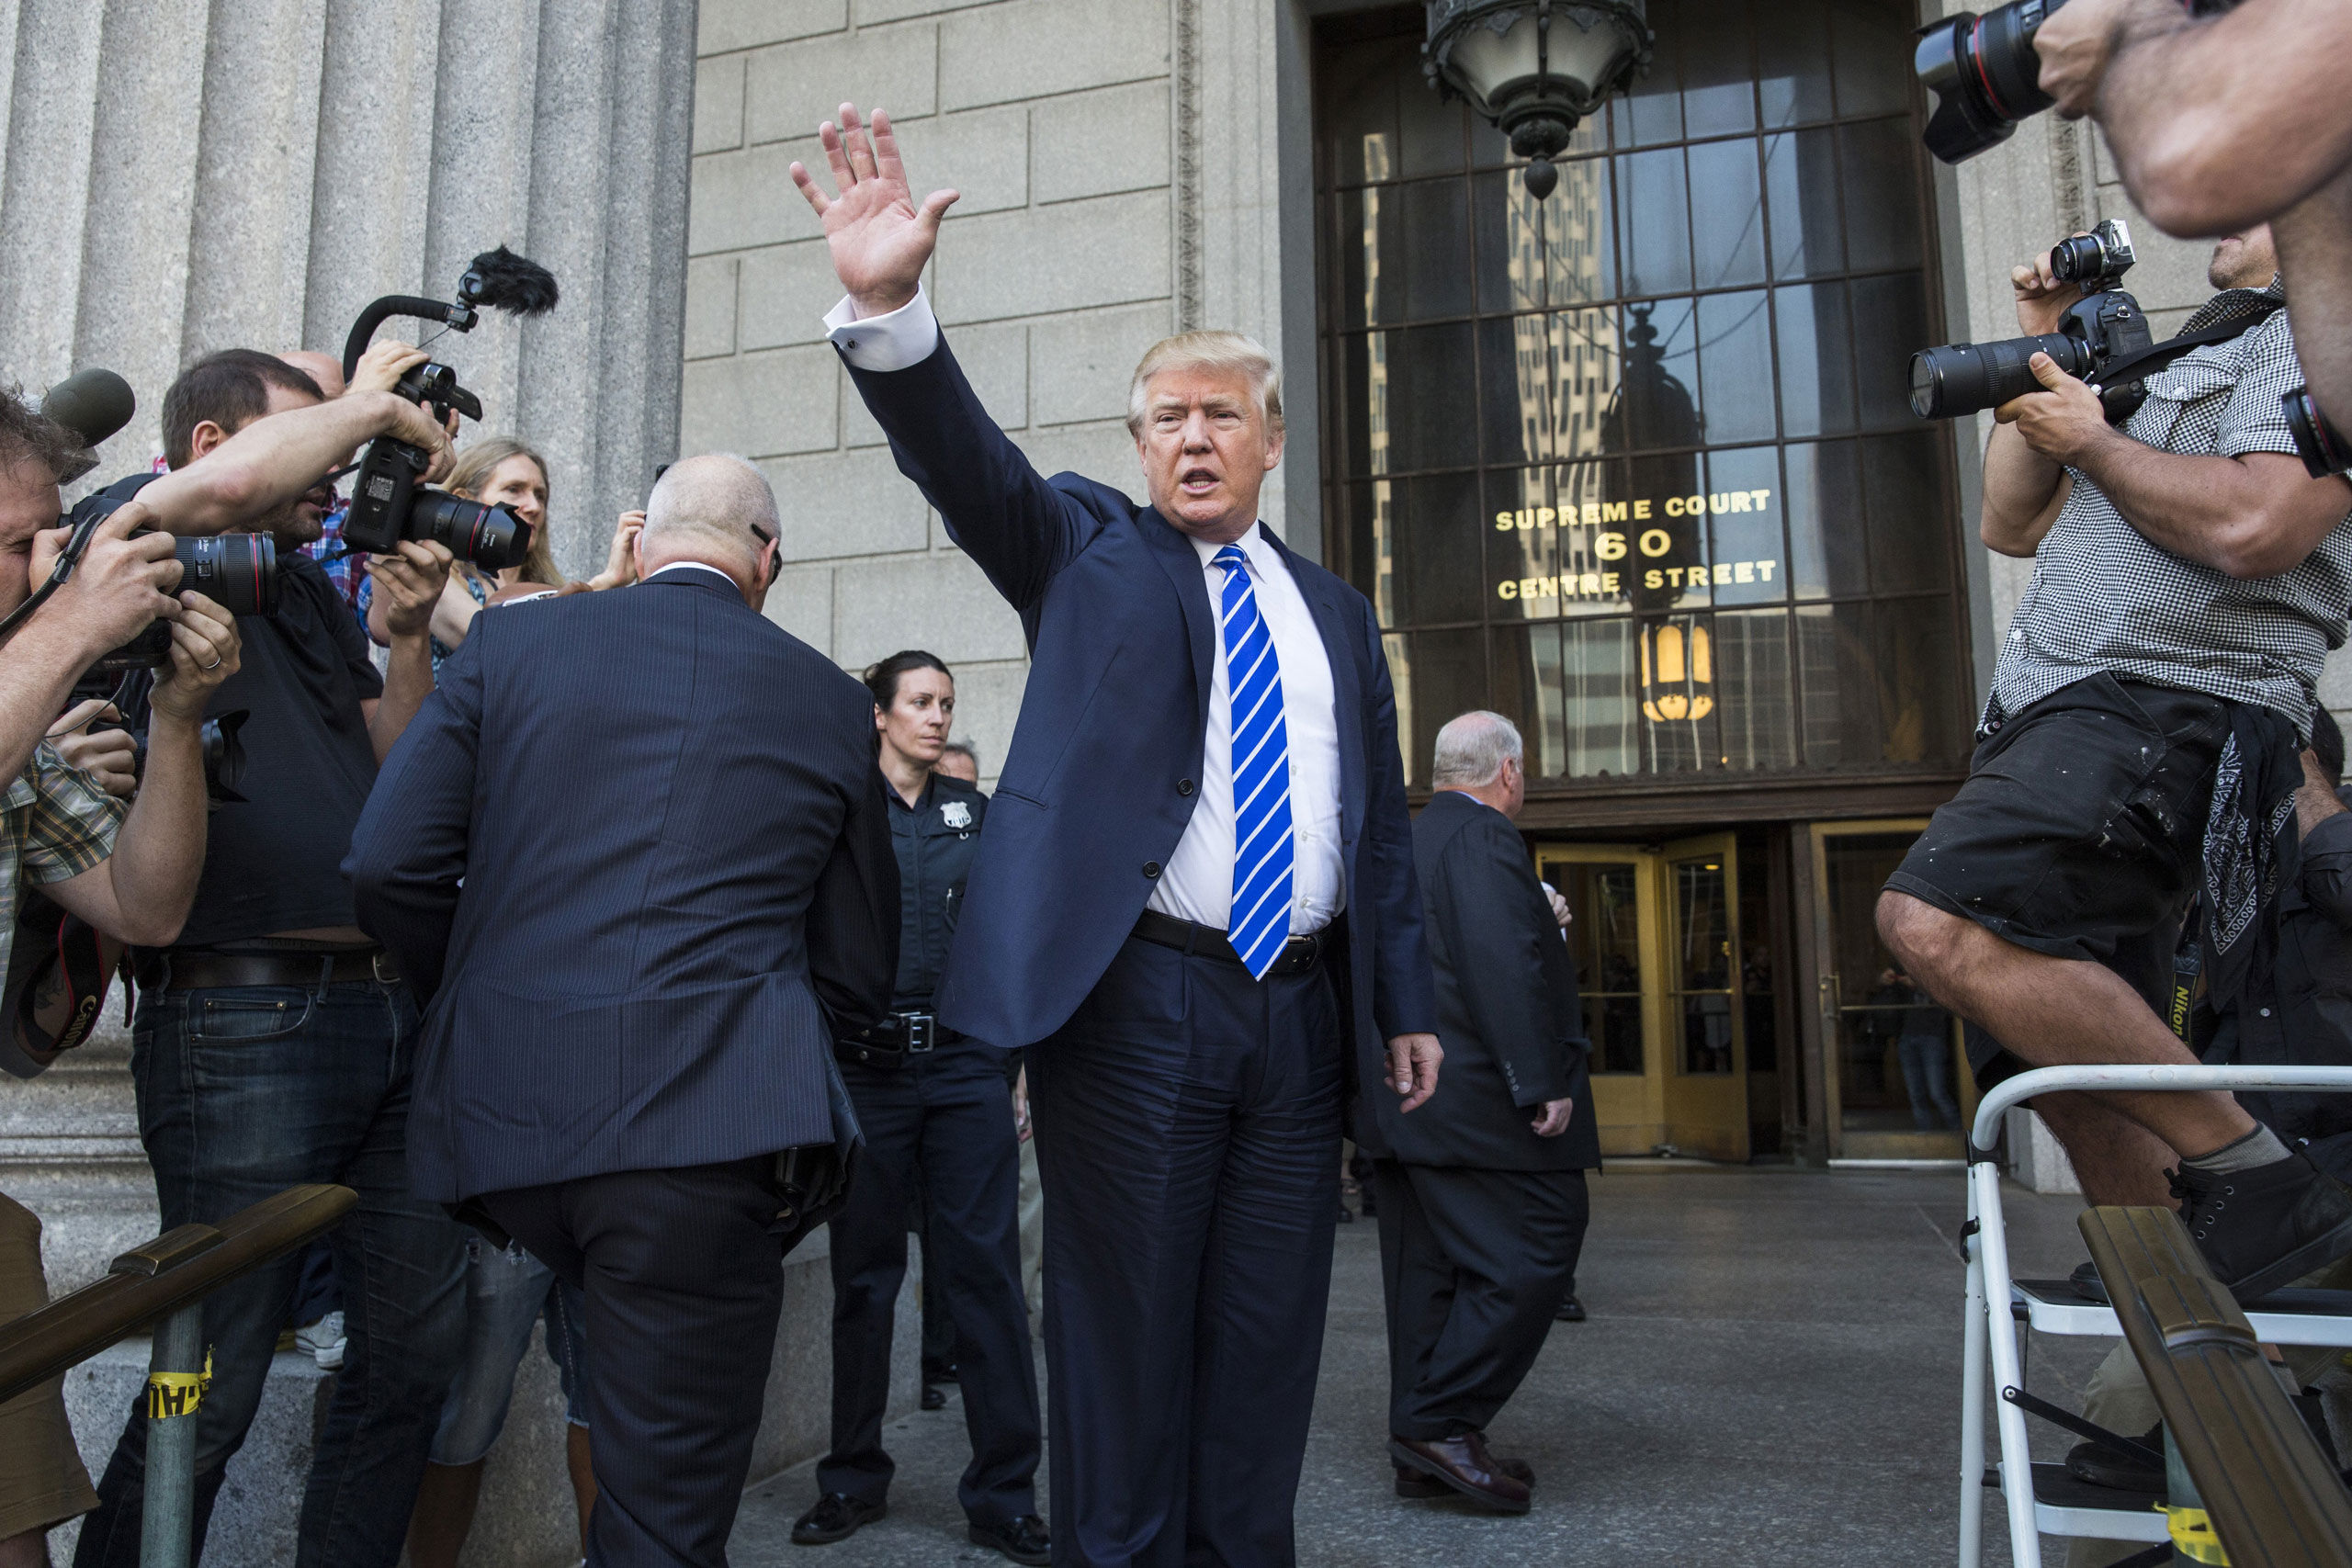 Donald Trump waves as he arrives at U.S. Federal Court to report for jury duty in New York City on August 17, 2015. (Andrew Burton—Getty Images)